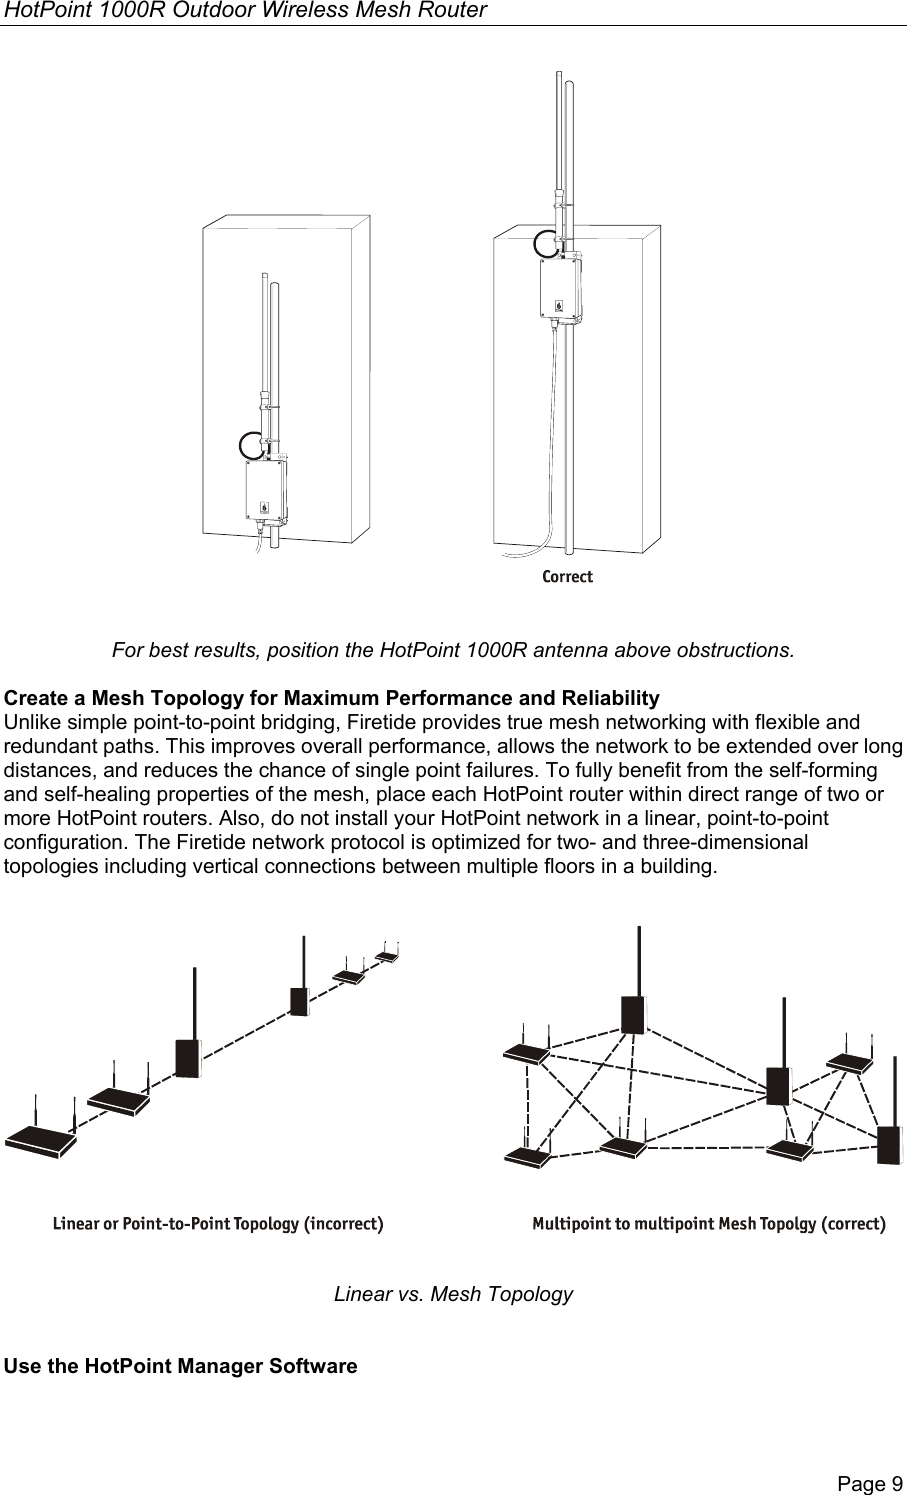 HotPoint 1000R Outdoor Wireless Mesh Router Page 9   For best results, position the HotPoint 1000R antenna above obstructions.  Create a Mesh Topology for Maximum Performance and Reliability Unlike simple point-to-point bridging, Firetide provides true mesh networking with flexible and redundant paths. This improves overall performance, allows the network to be extended over long distances, and reduces the chance of single point failures. To fully benefit from the self-forming and self-healing properties of the mesh, place each HotPoint router within direct range of two or more HotPoint routers. Also, do not install your HotPoint network in a linear, point-to-point configuration. The Firetide network protocol is optimized for two- and three-dimensional topologies including vertical connections between multiple floors in a building.      Linear vs. Mesh Topology   Use the HotPoint Manager Software 